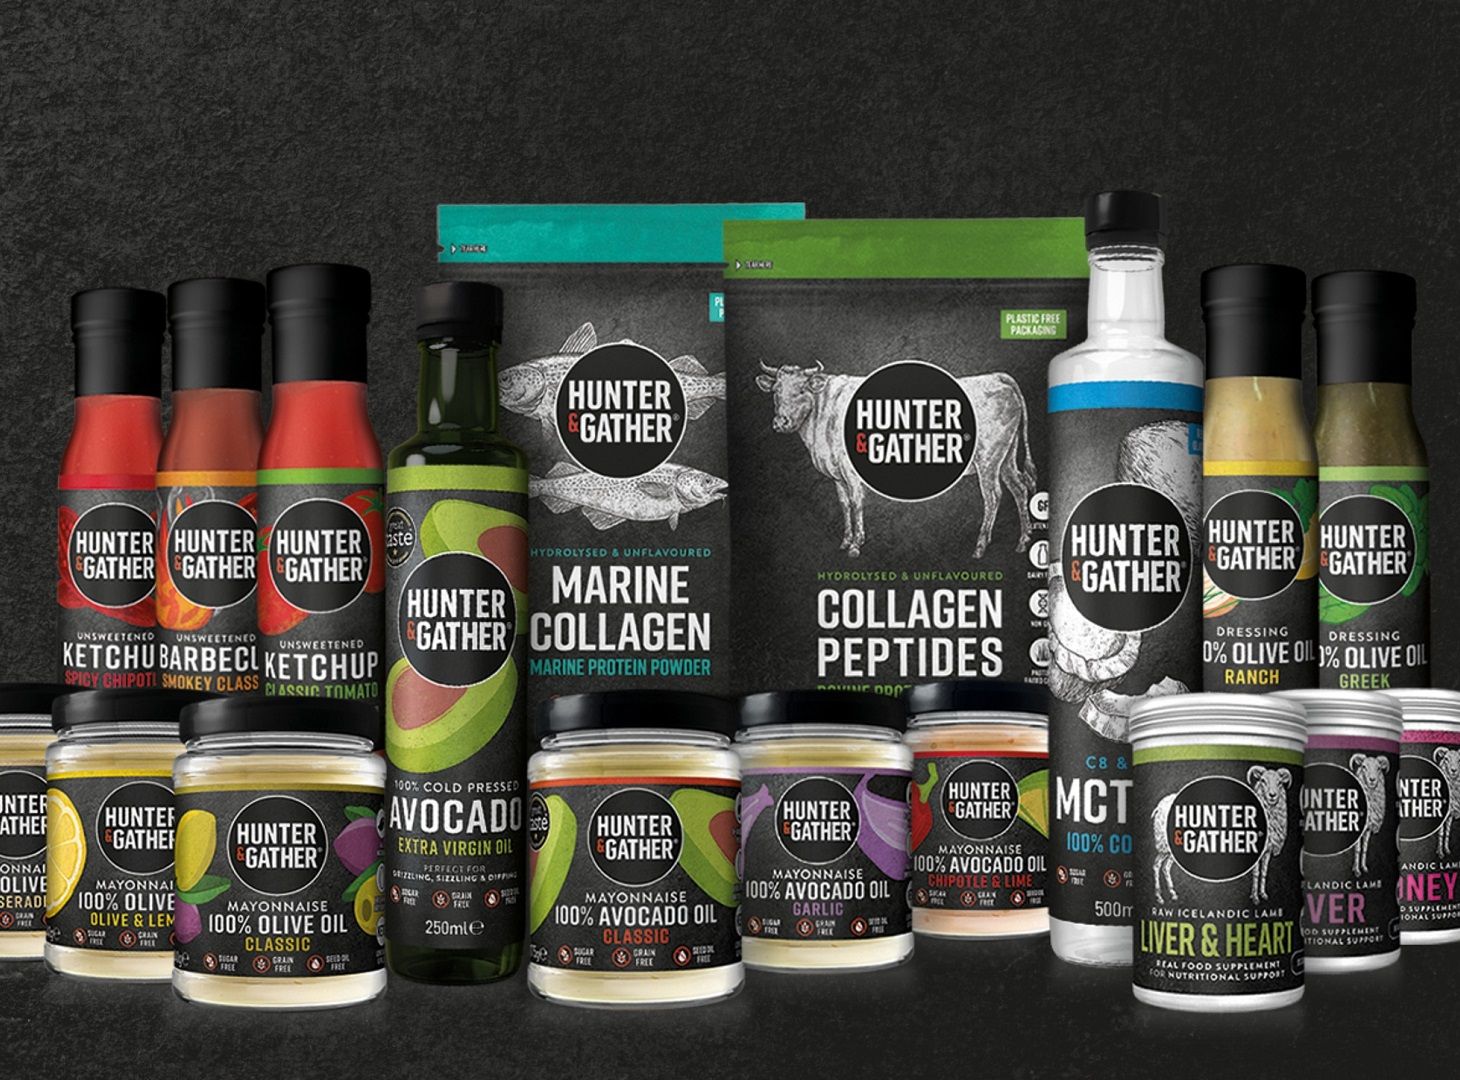 Image of Hunter & Gather Products